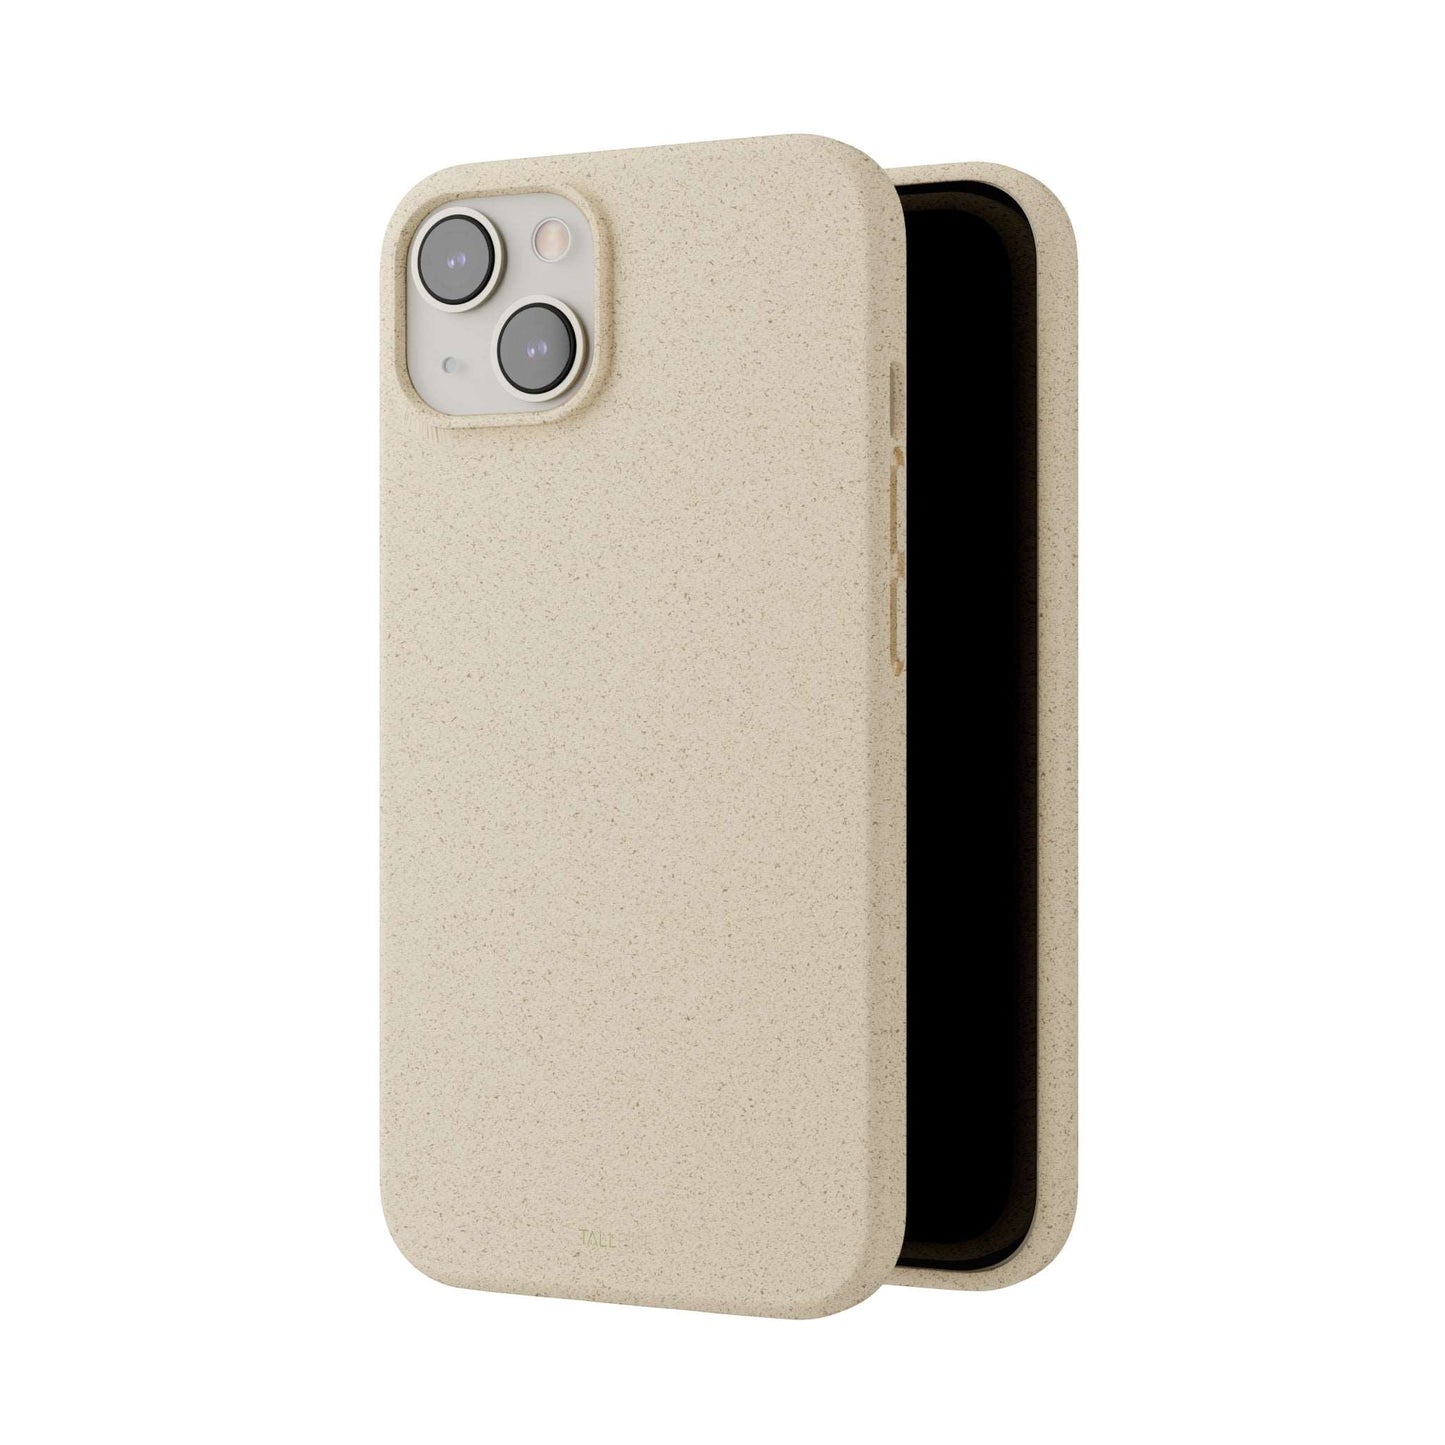 Peach Granite - Eco Case - Tallpine | Sustainable and Eco-Friendly Phone Cases - Abstract Beige Blank Solid color